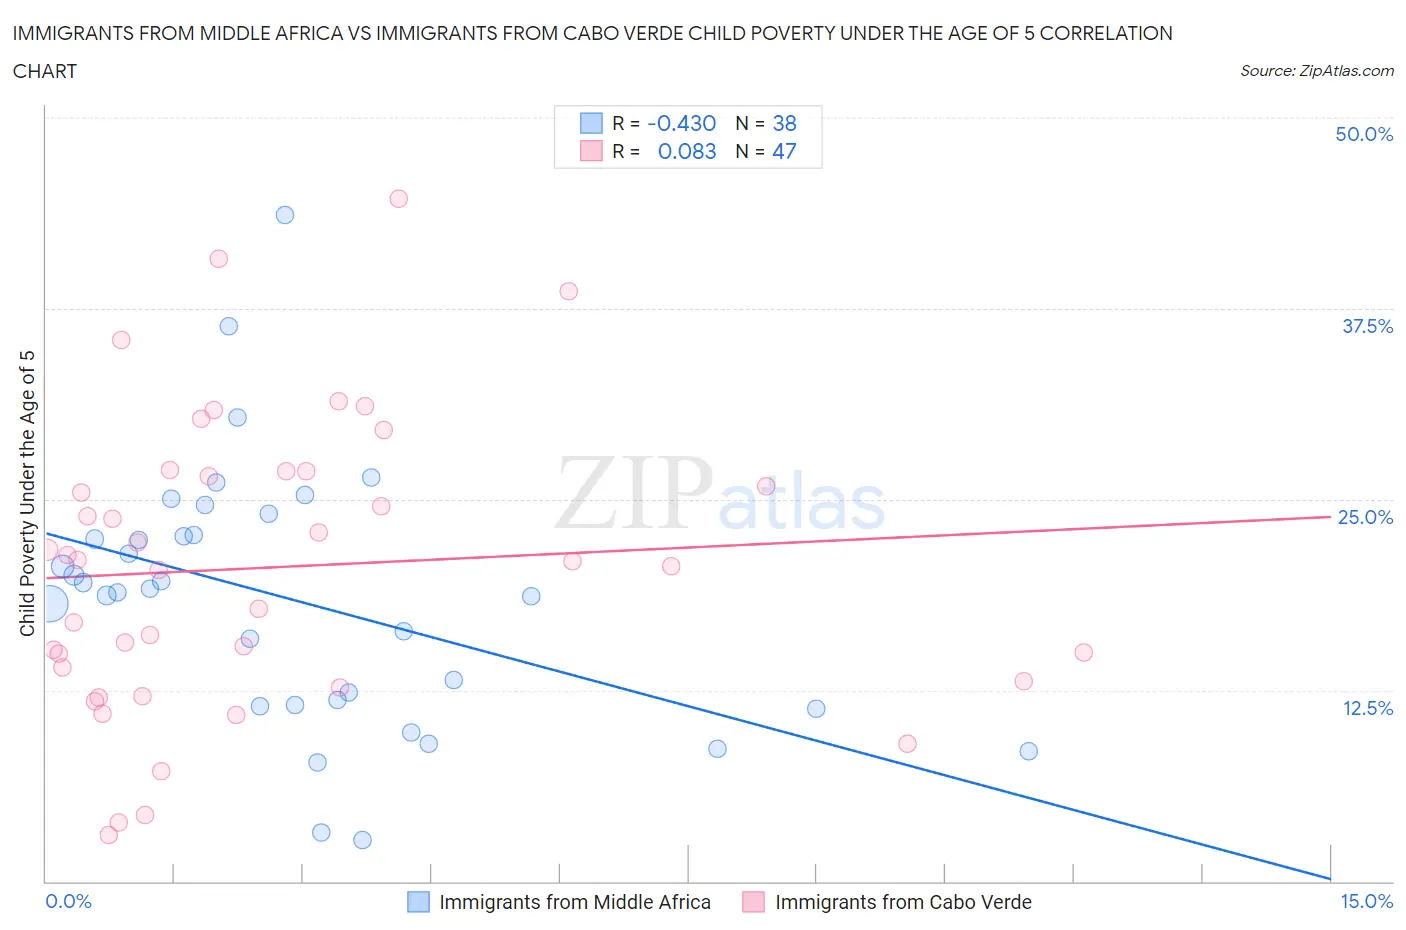 Immigrants from Middle Africa vs Immigrants from Cabo Verde Child Poverty Under the Age of 5